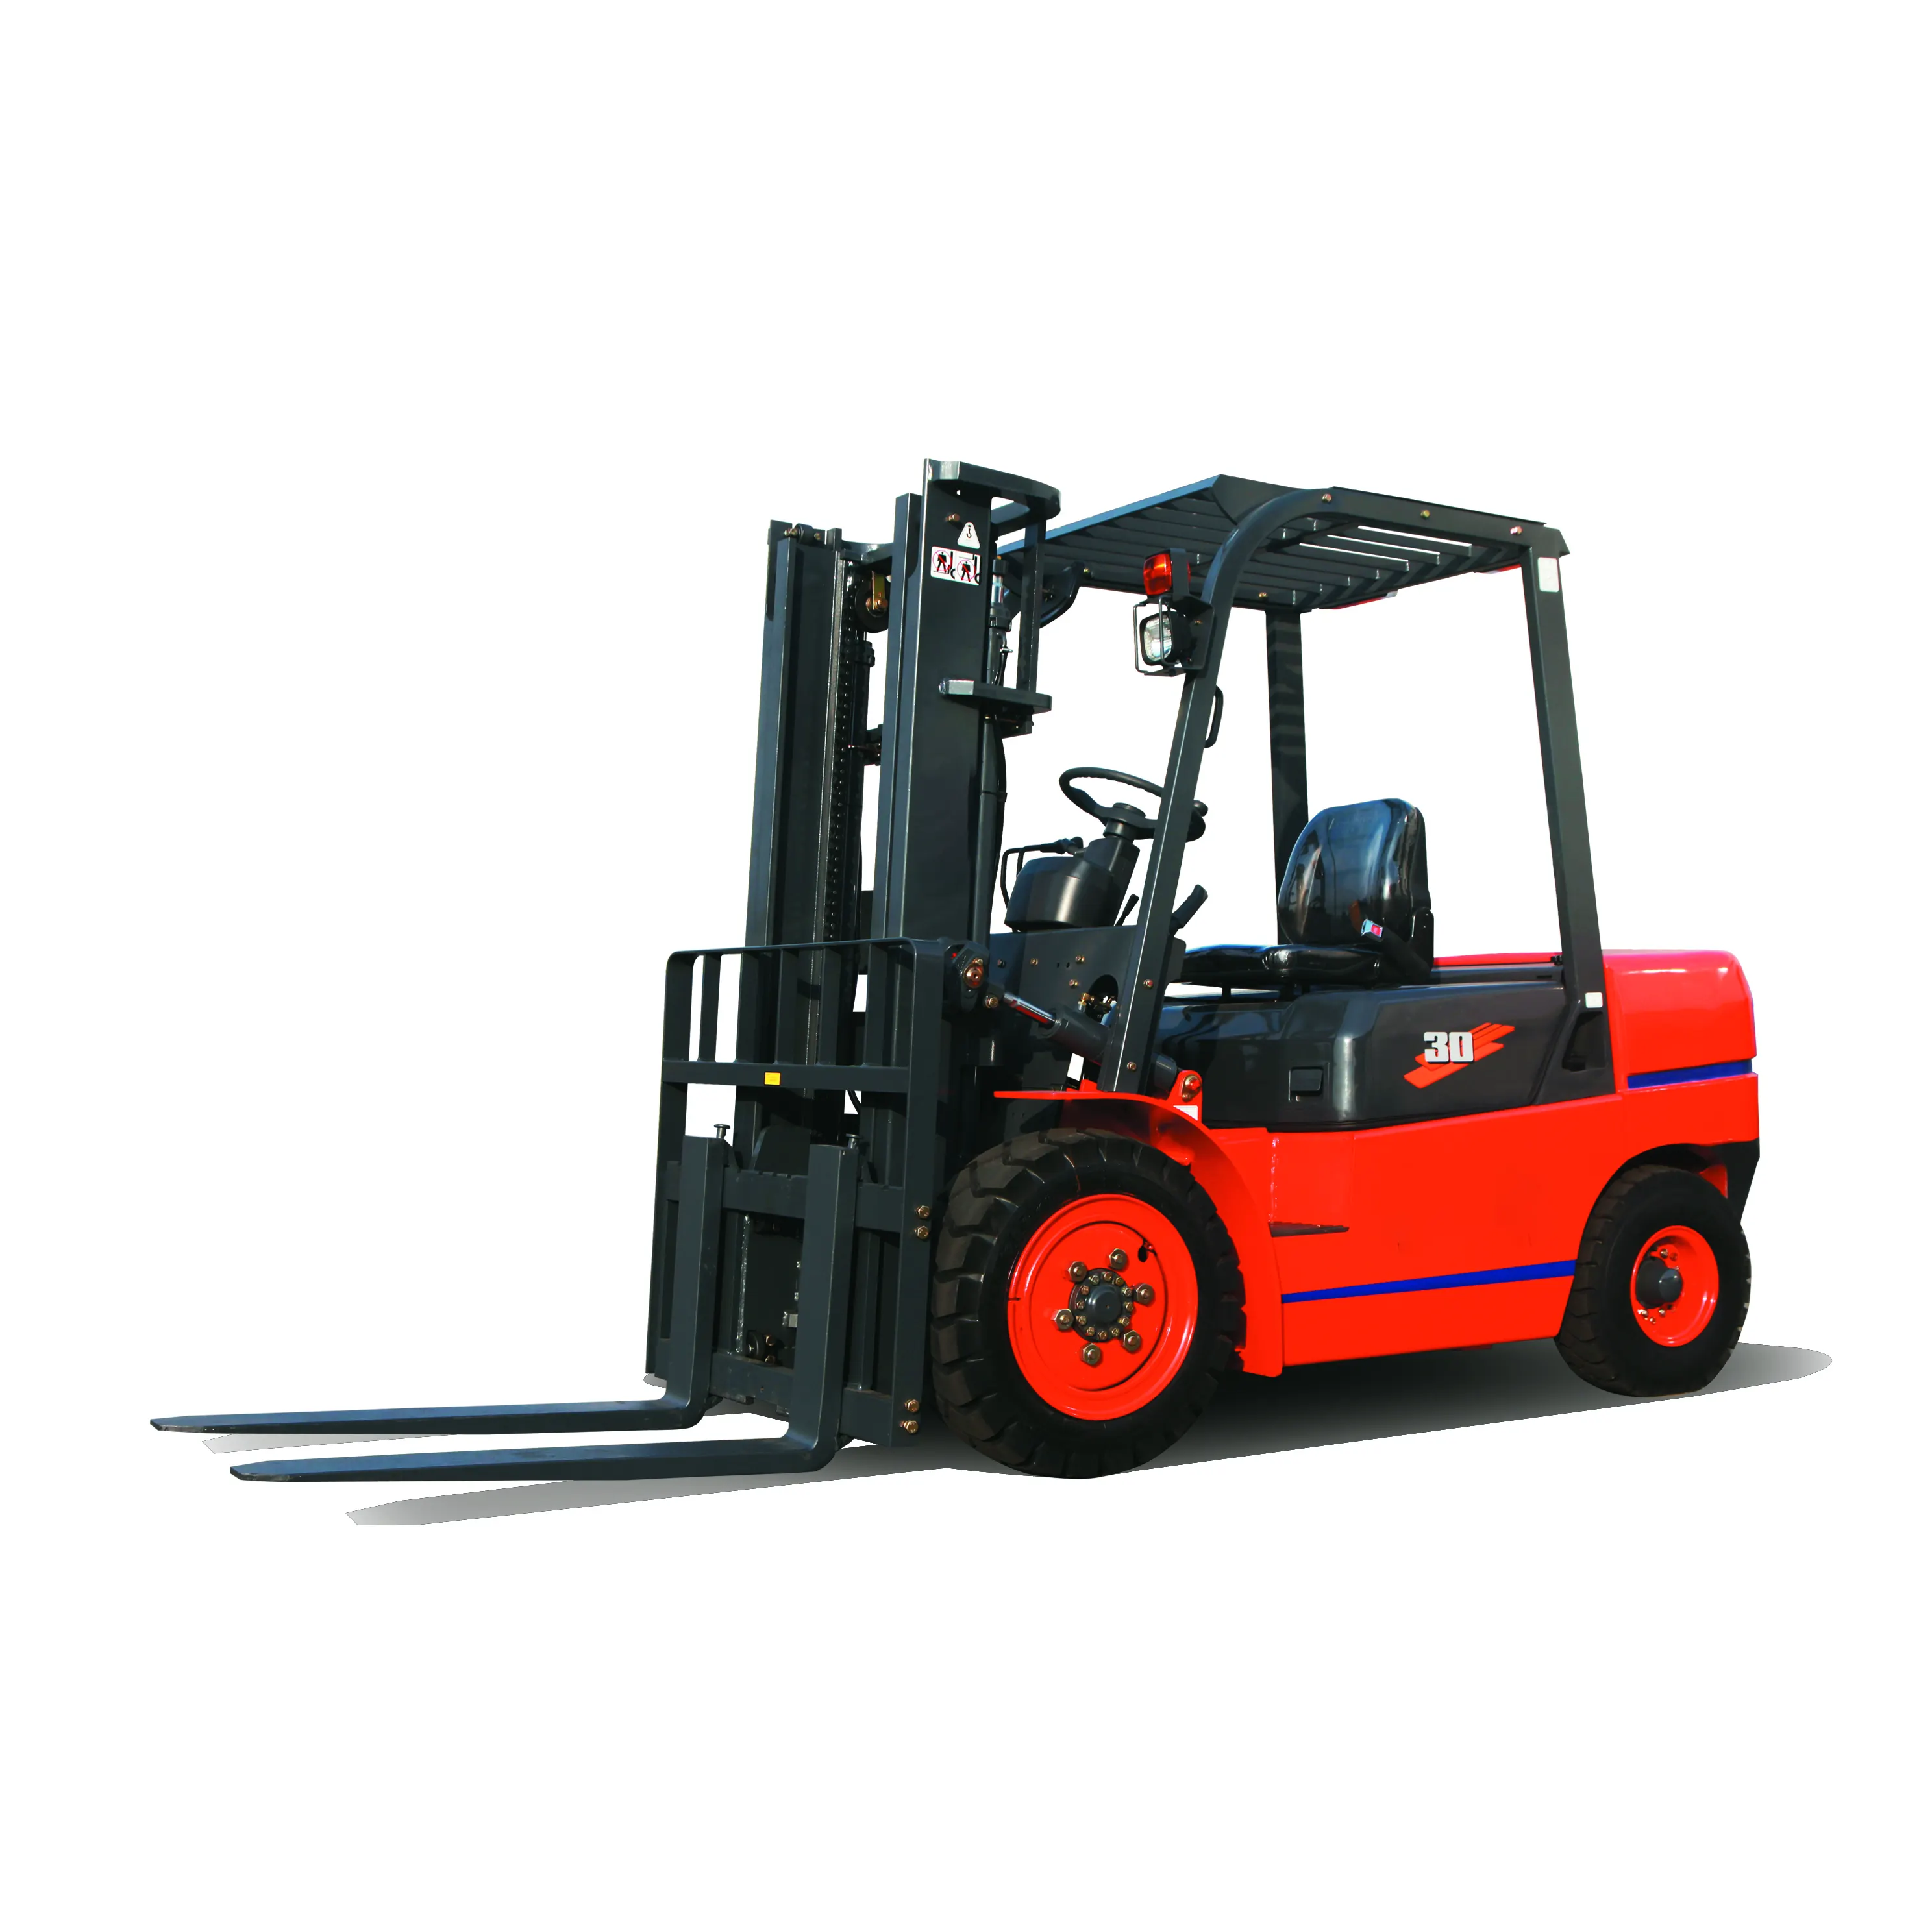 China Brand-New 3 Ton Diesel Forklift with Automatic Transmission FD30